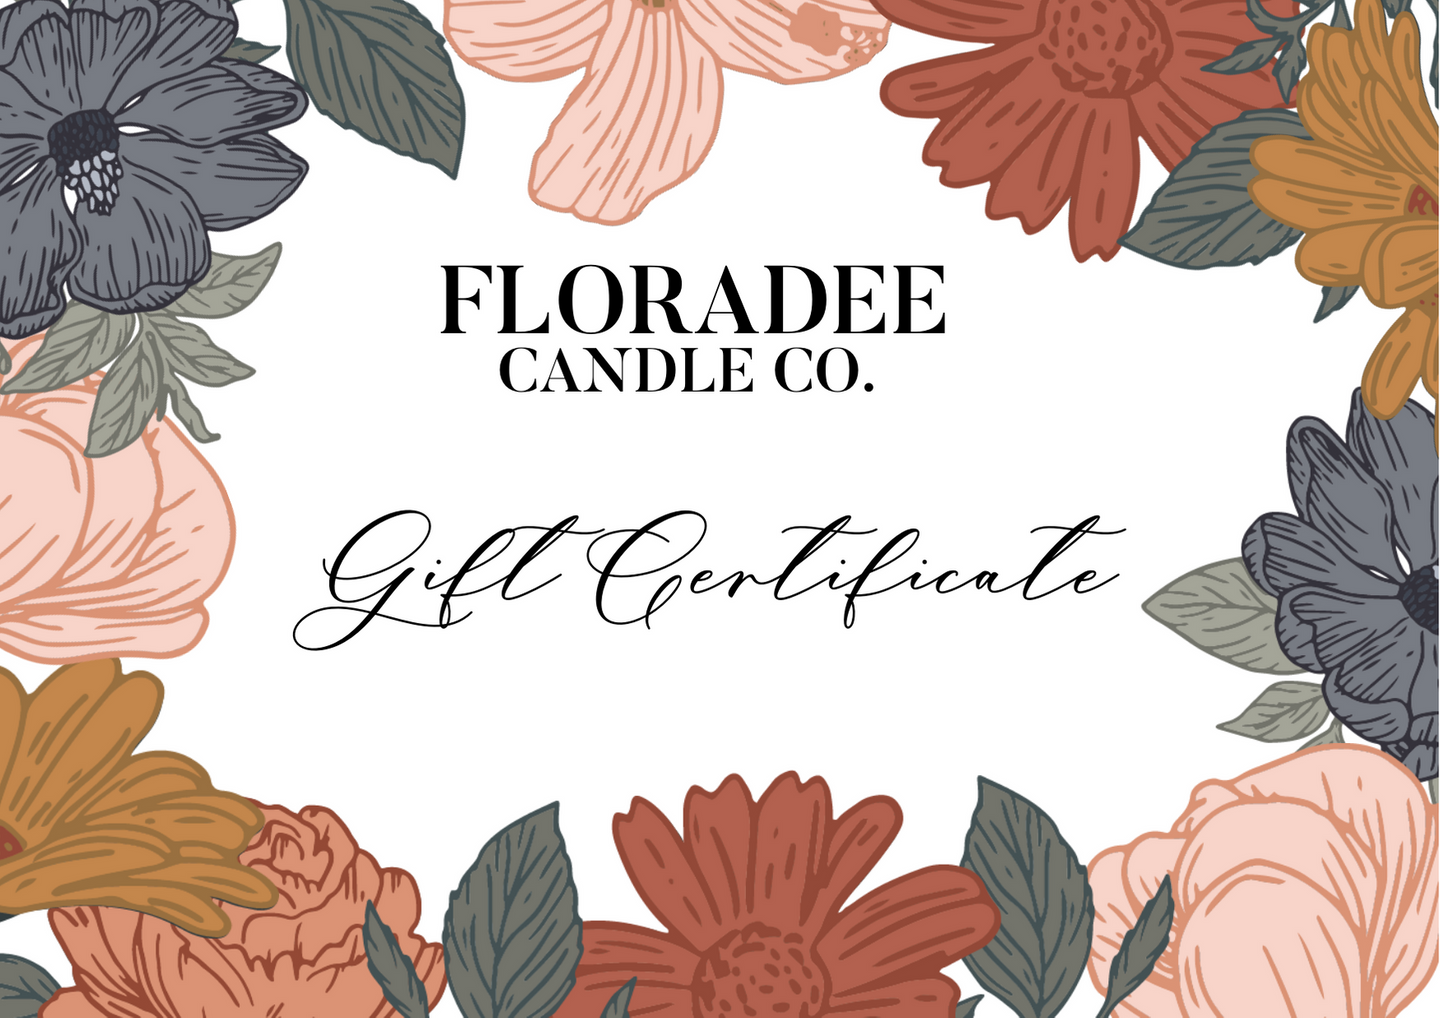 Floradee Candle Co. Gift Certificate